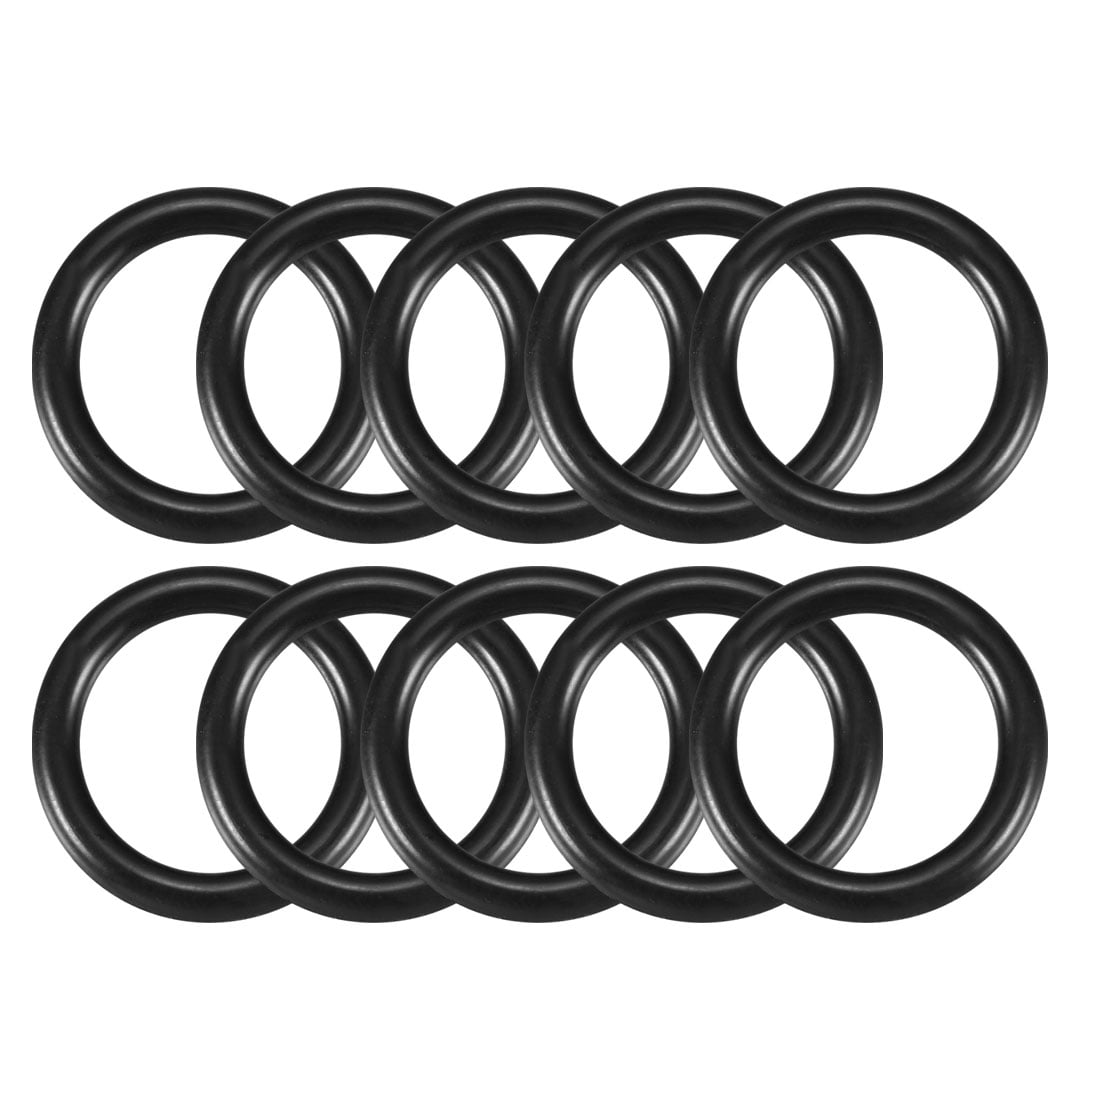 10 Pcs Black Rubber 55mm x 2mm Oil Seal O Rings Sealing Gaskets Washer 